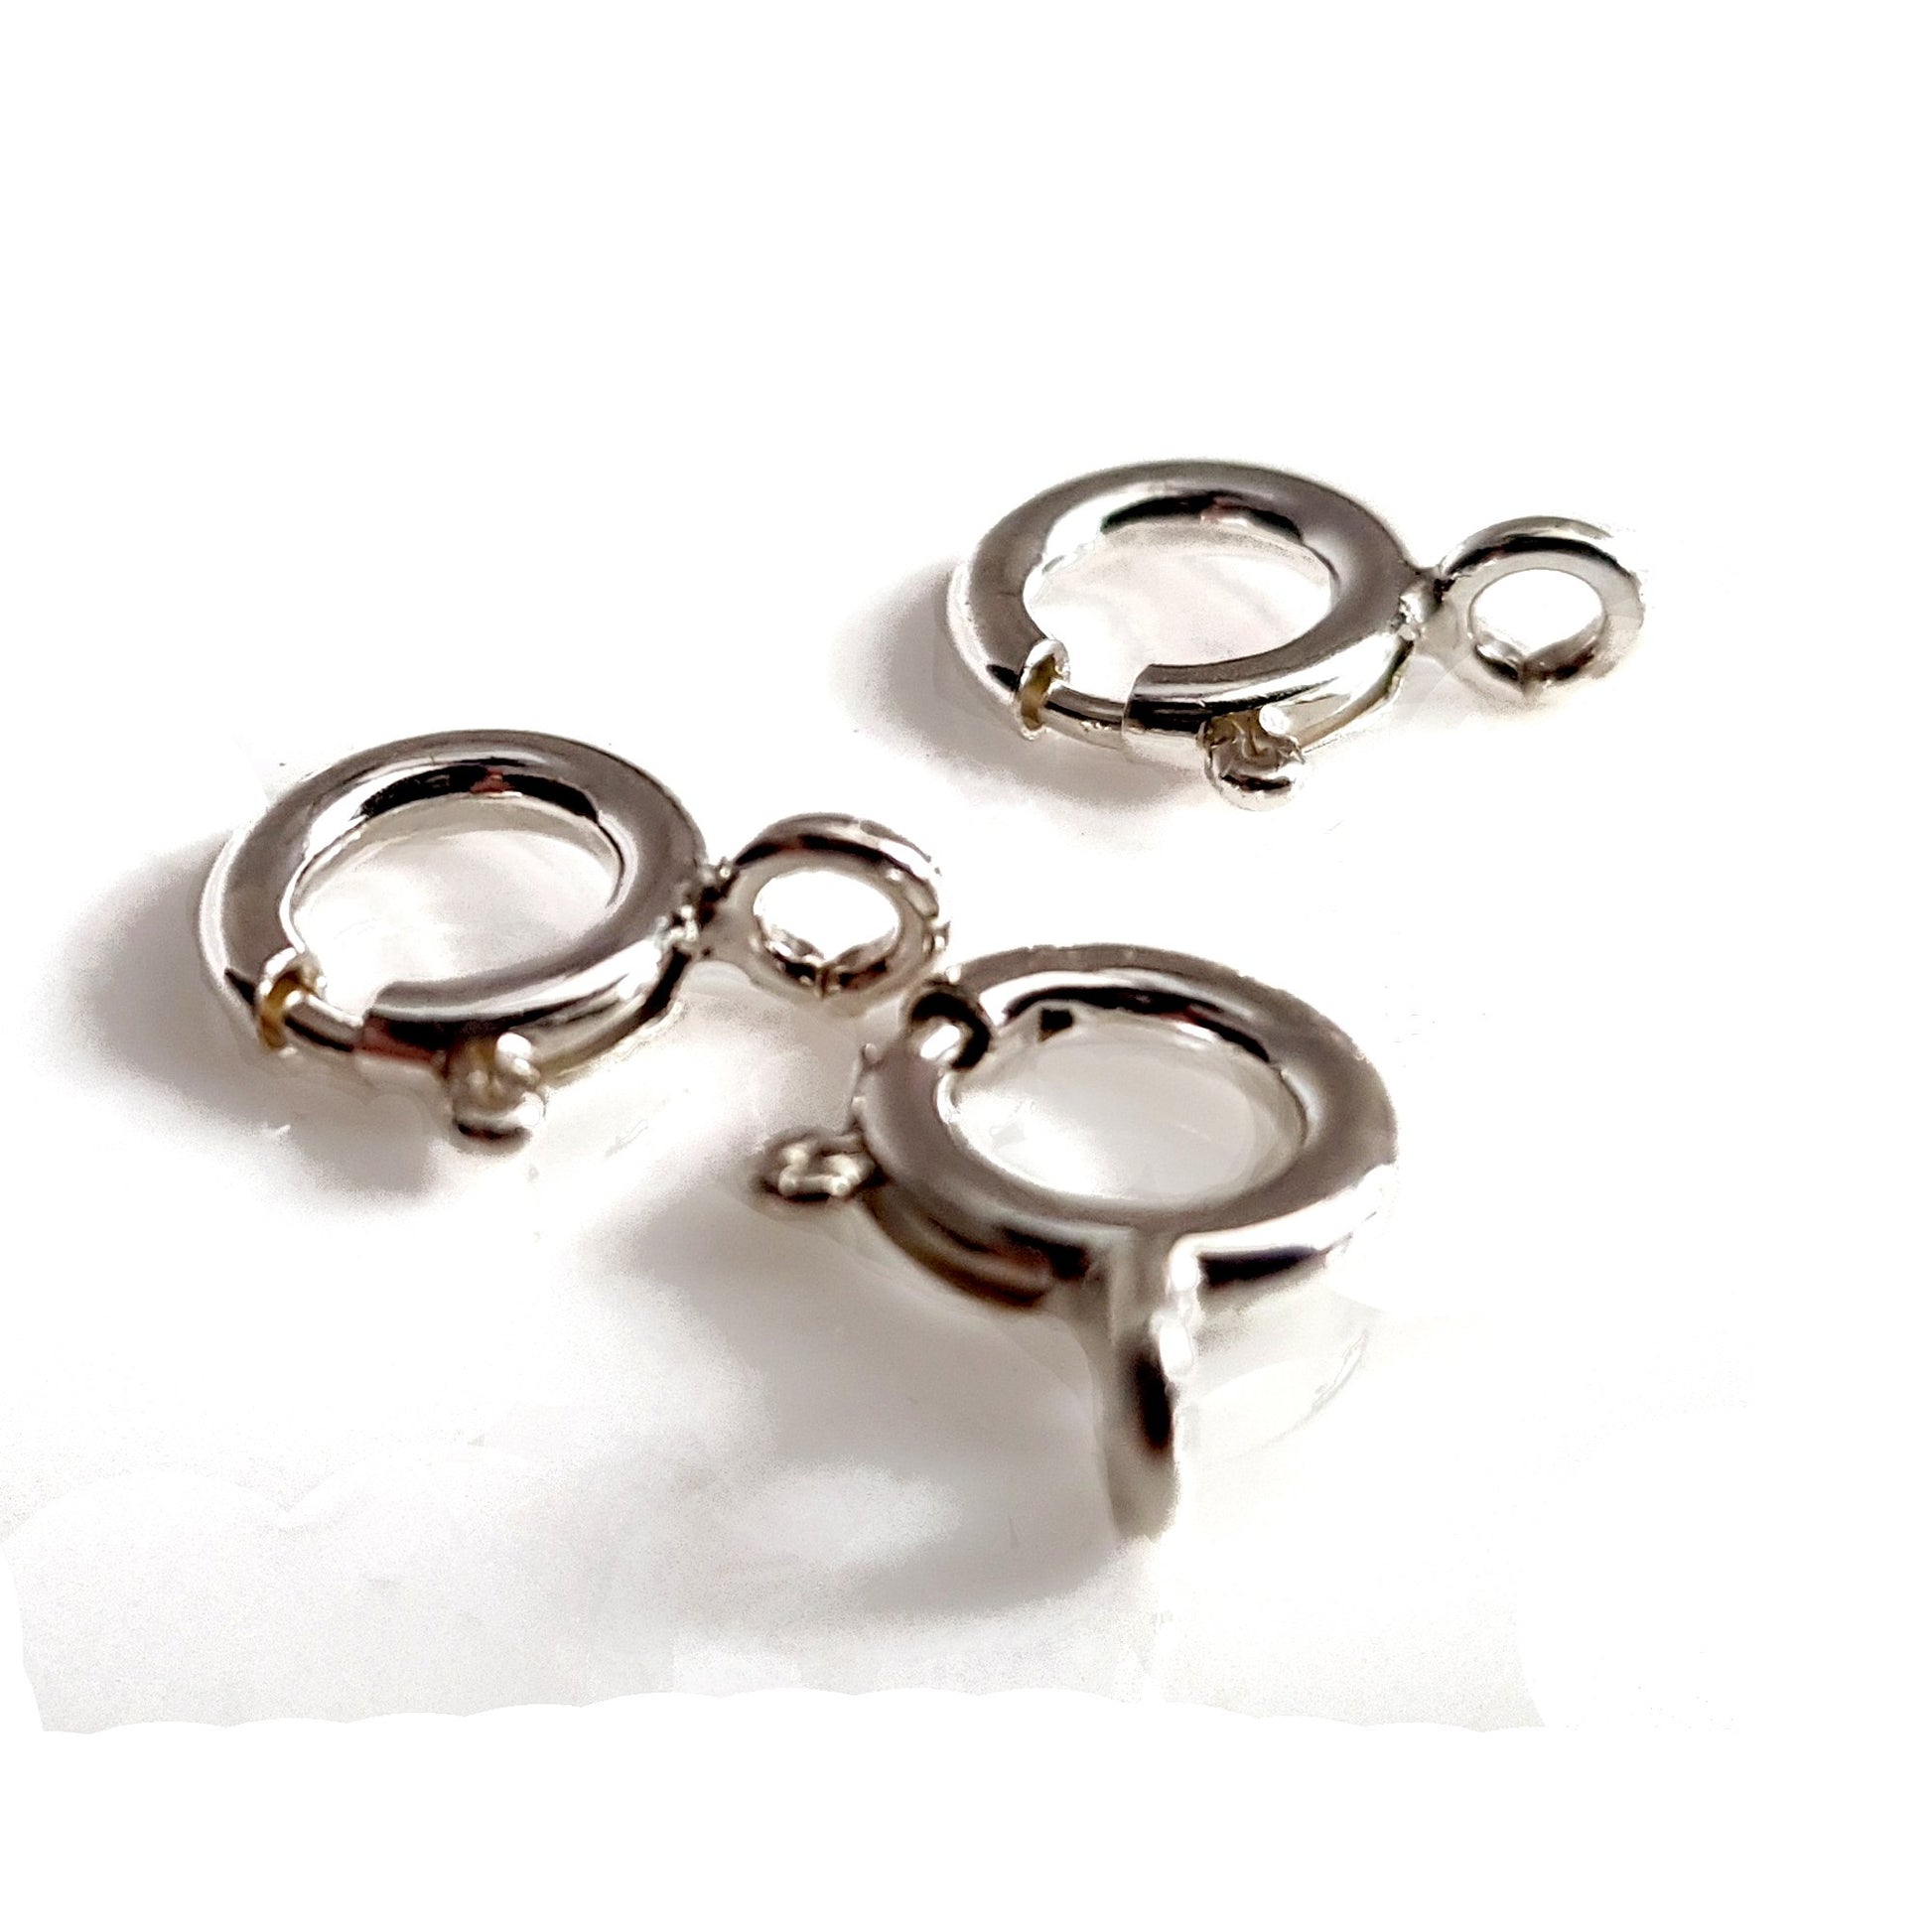 Bolt Ring Clasp 6mm Sterling Silver 3pcs | SS-022BR6 | Jewellery Supply - Kalitheo Jewellery